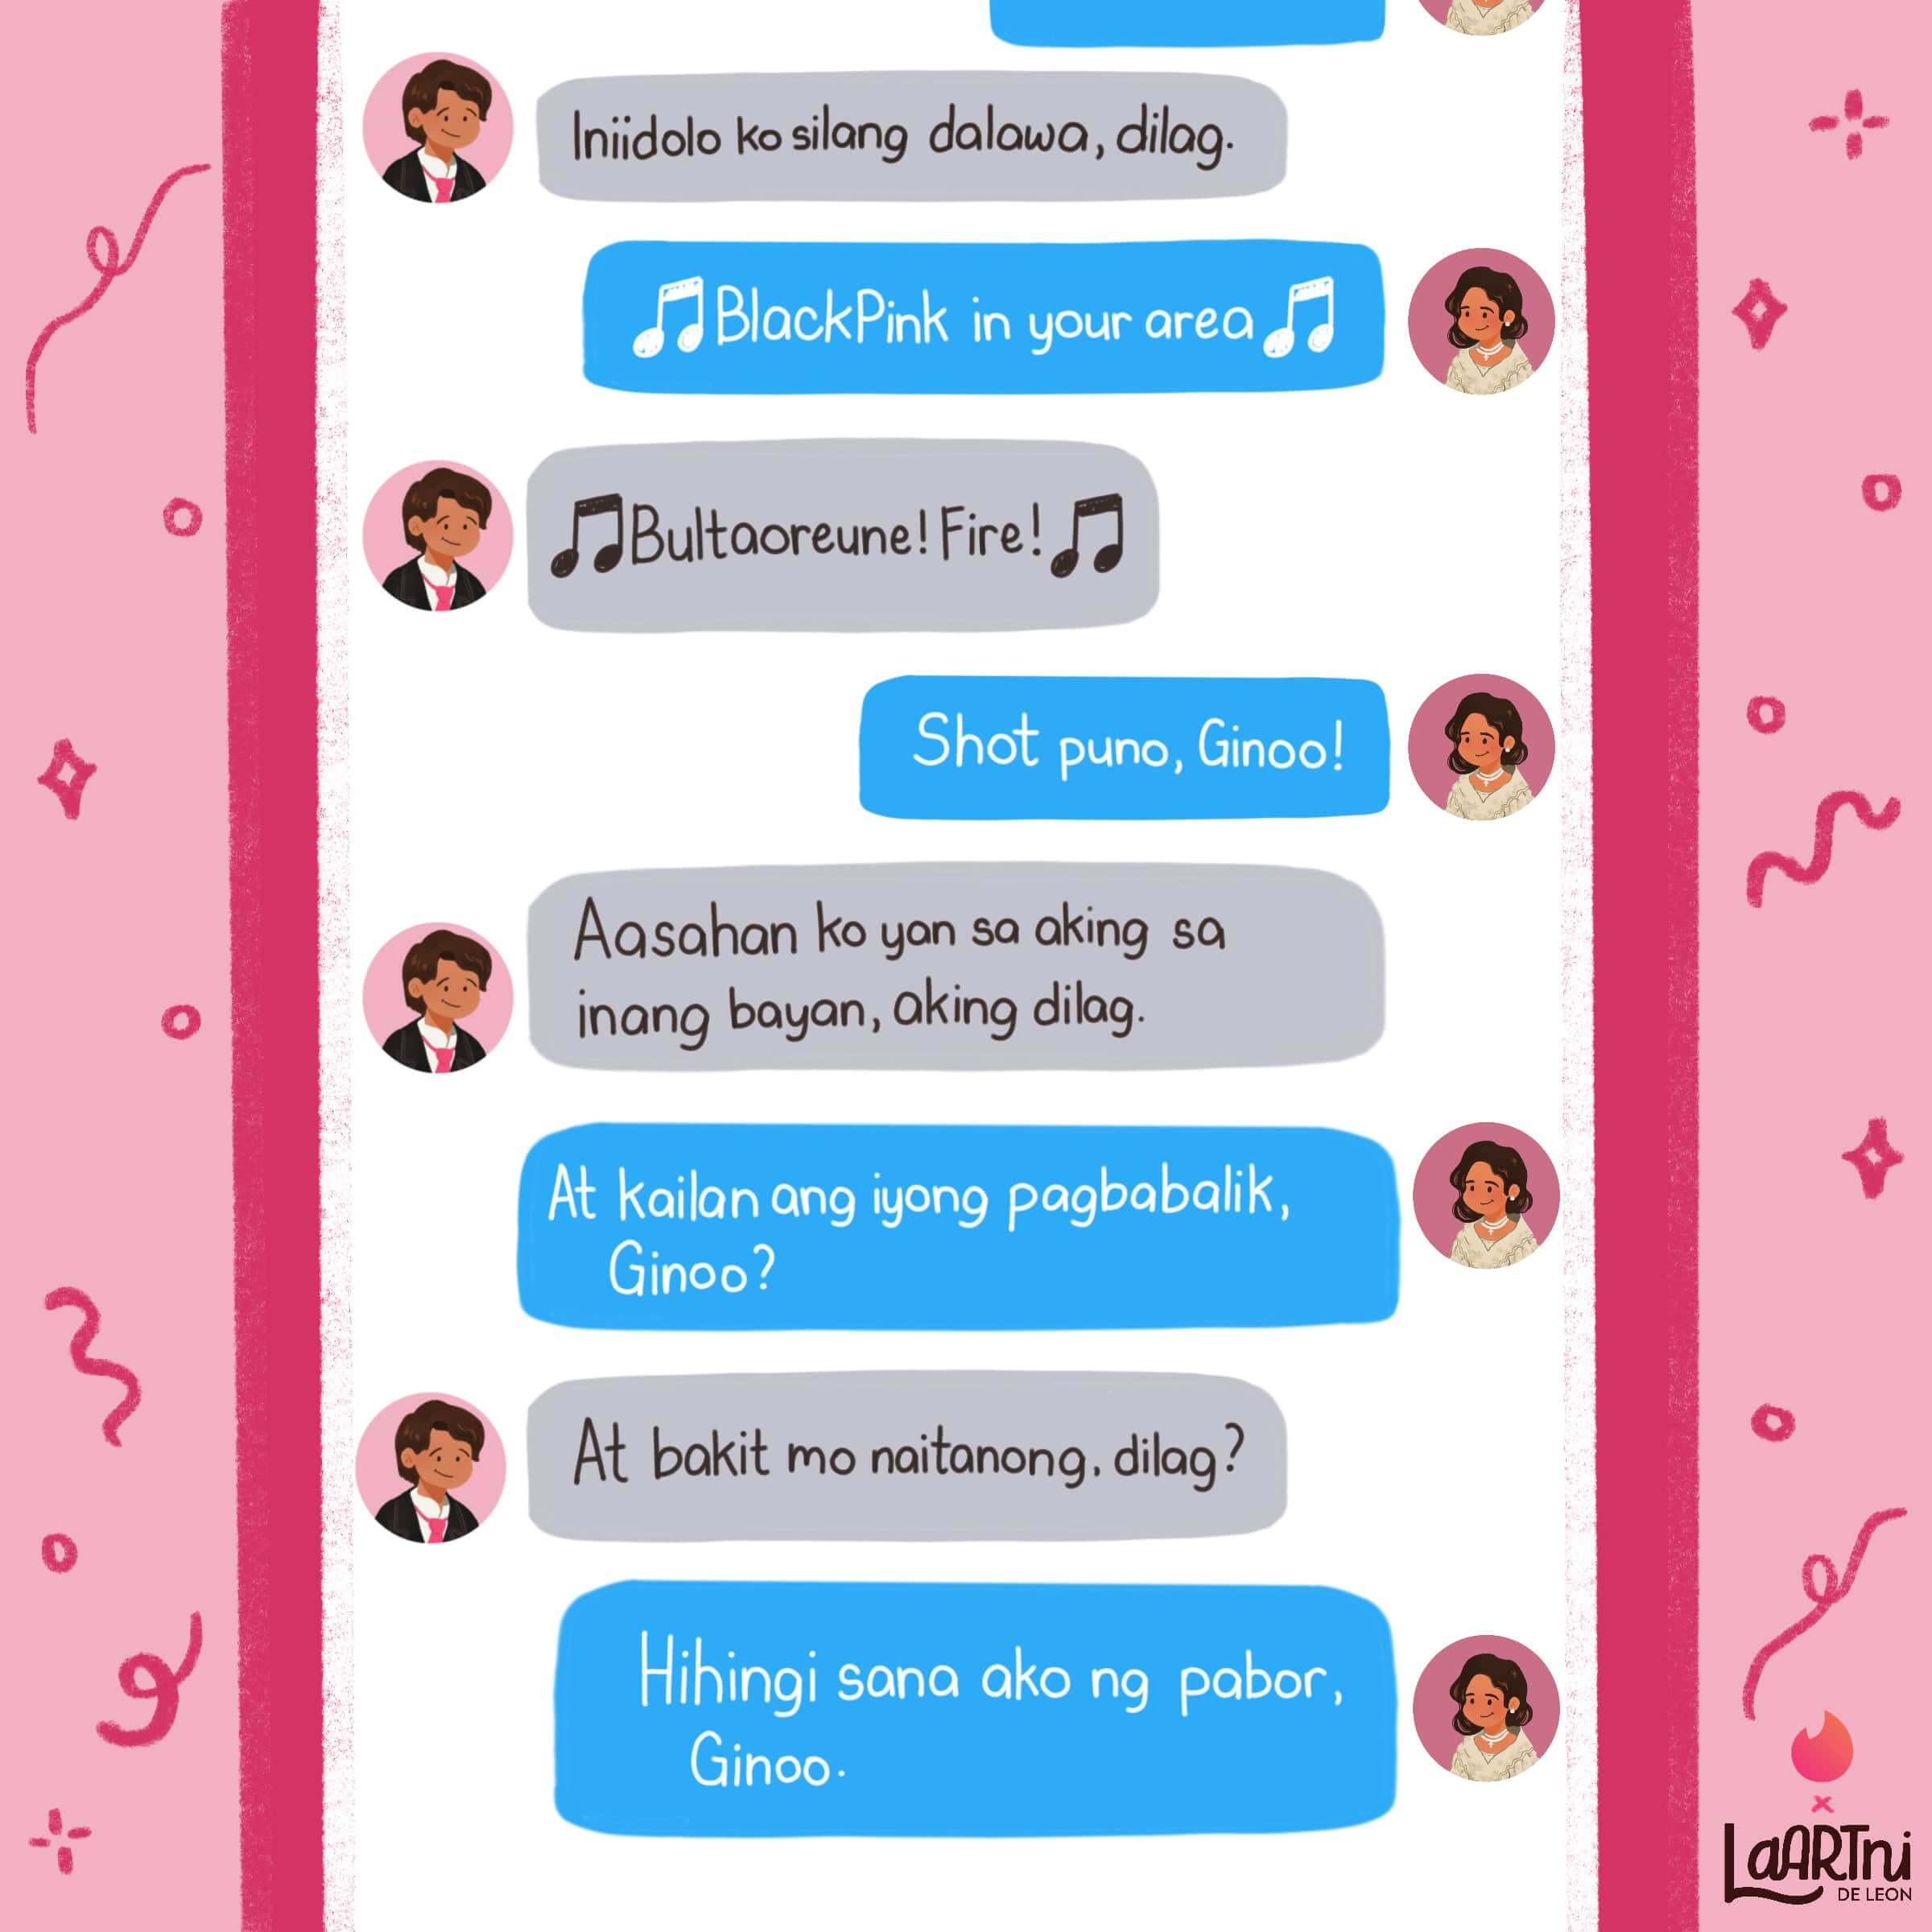 This Whimsical Comicserye Teaches Us How to Score a Match on Tinder